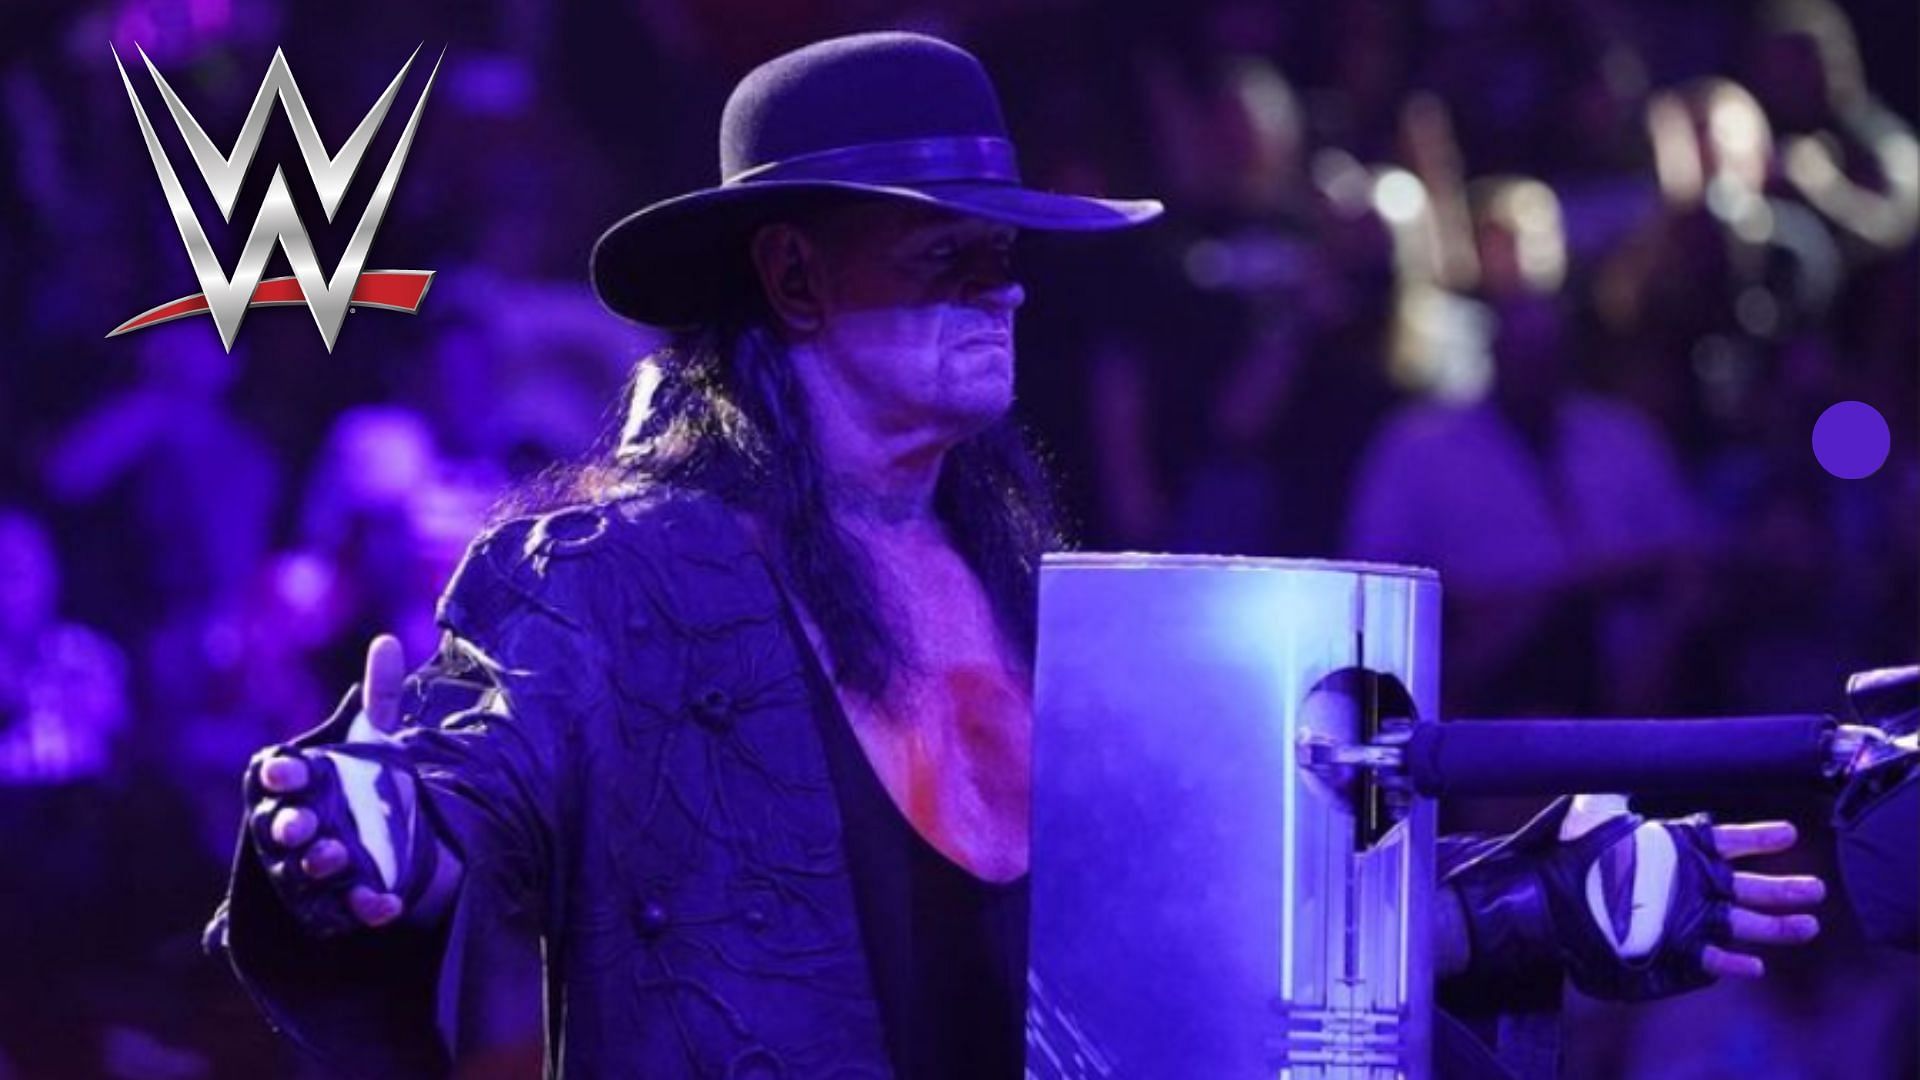 The Undertaker was inducted into the Hall of Fame last year